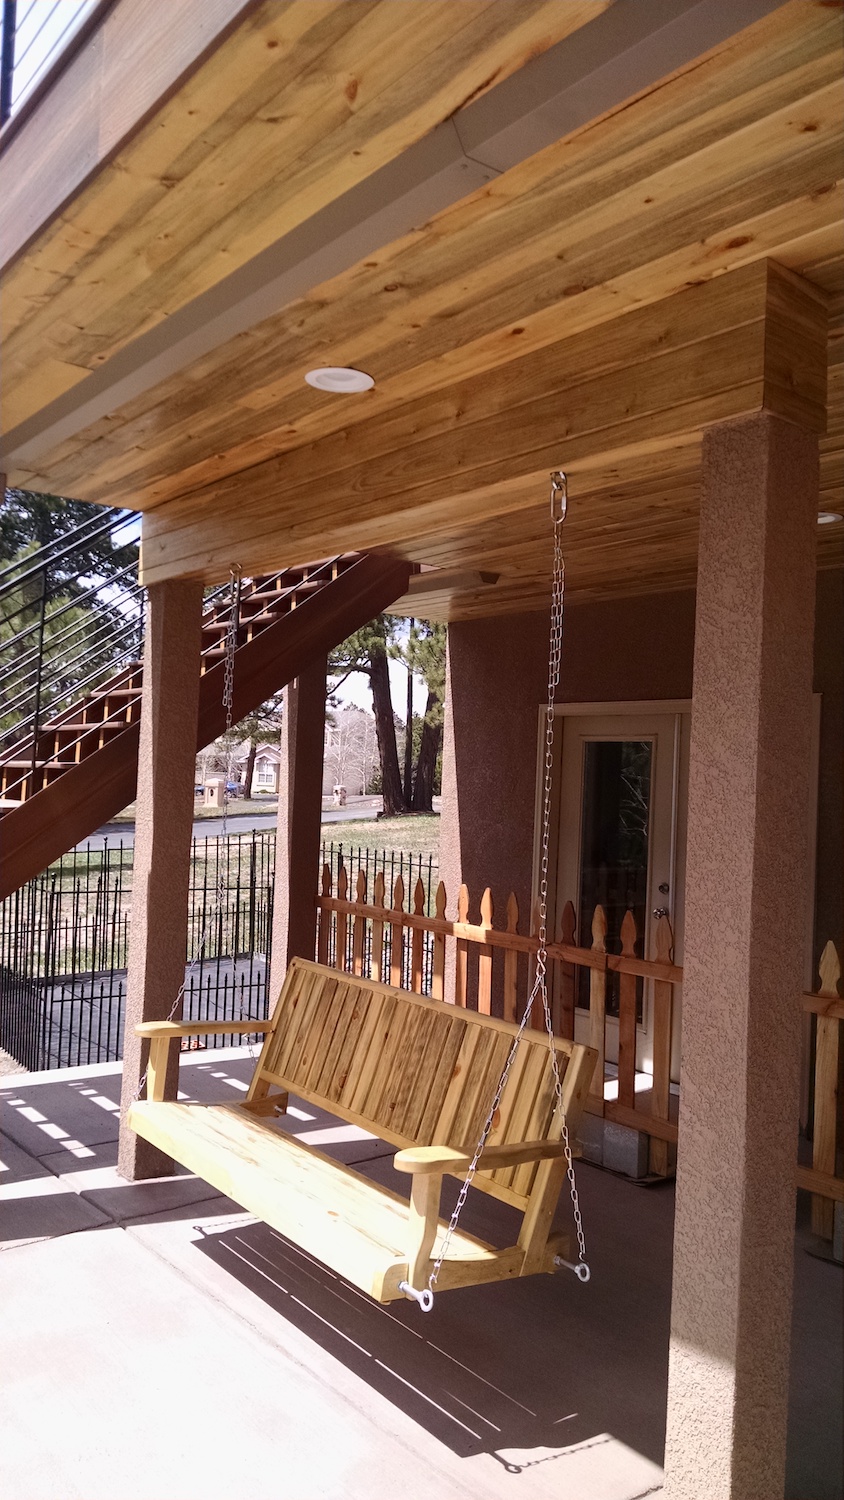 Adding a Trex RainEscape system under an elevated deck creates even more outdoor living space.